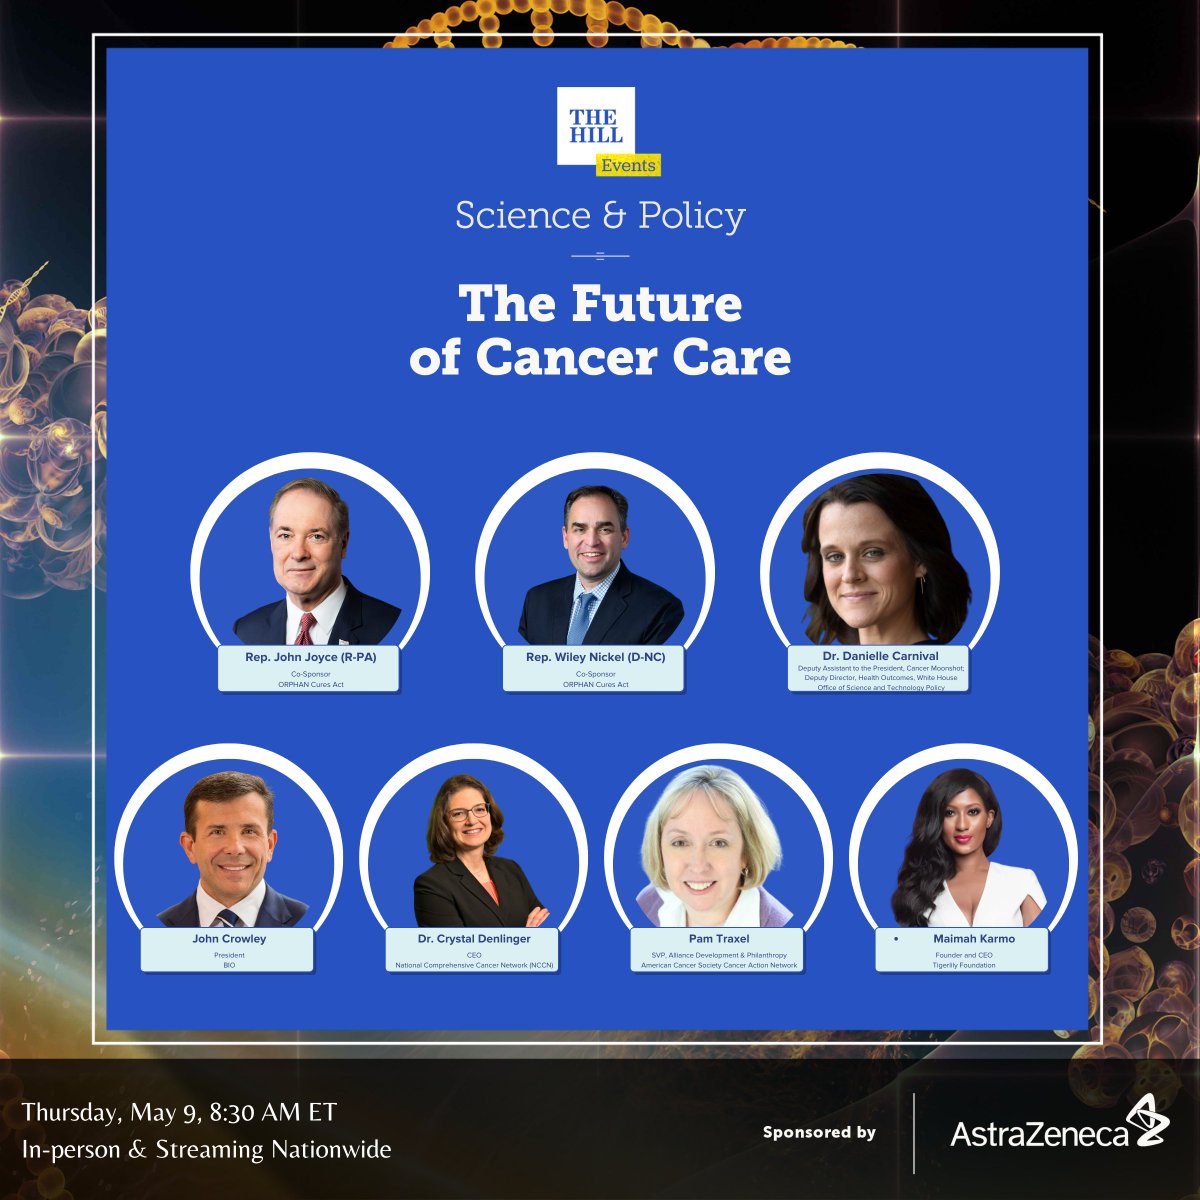 BIO President & CEO John F. Crowley will speaking alongside some incredible individuals at The Hill's Science & Policy: The Future of Cancer Care Summit this Thursday, May 9th. thehill.com/events/4582615…